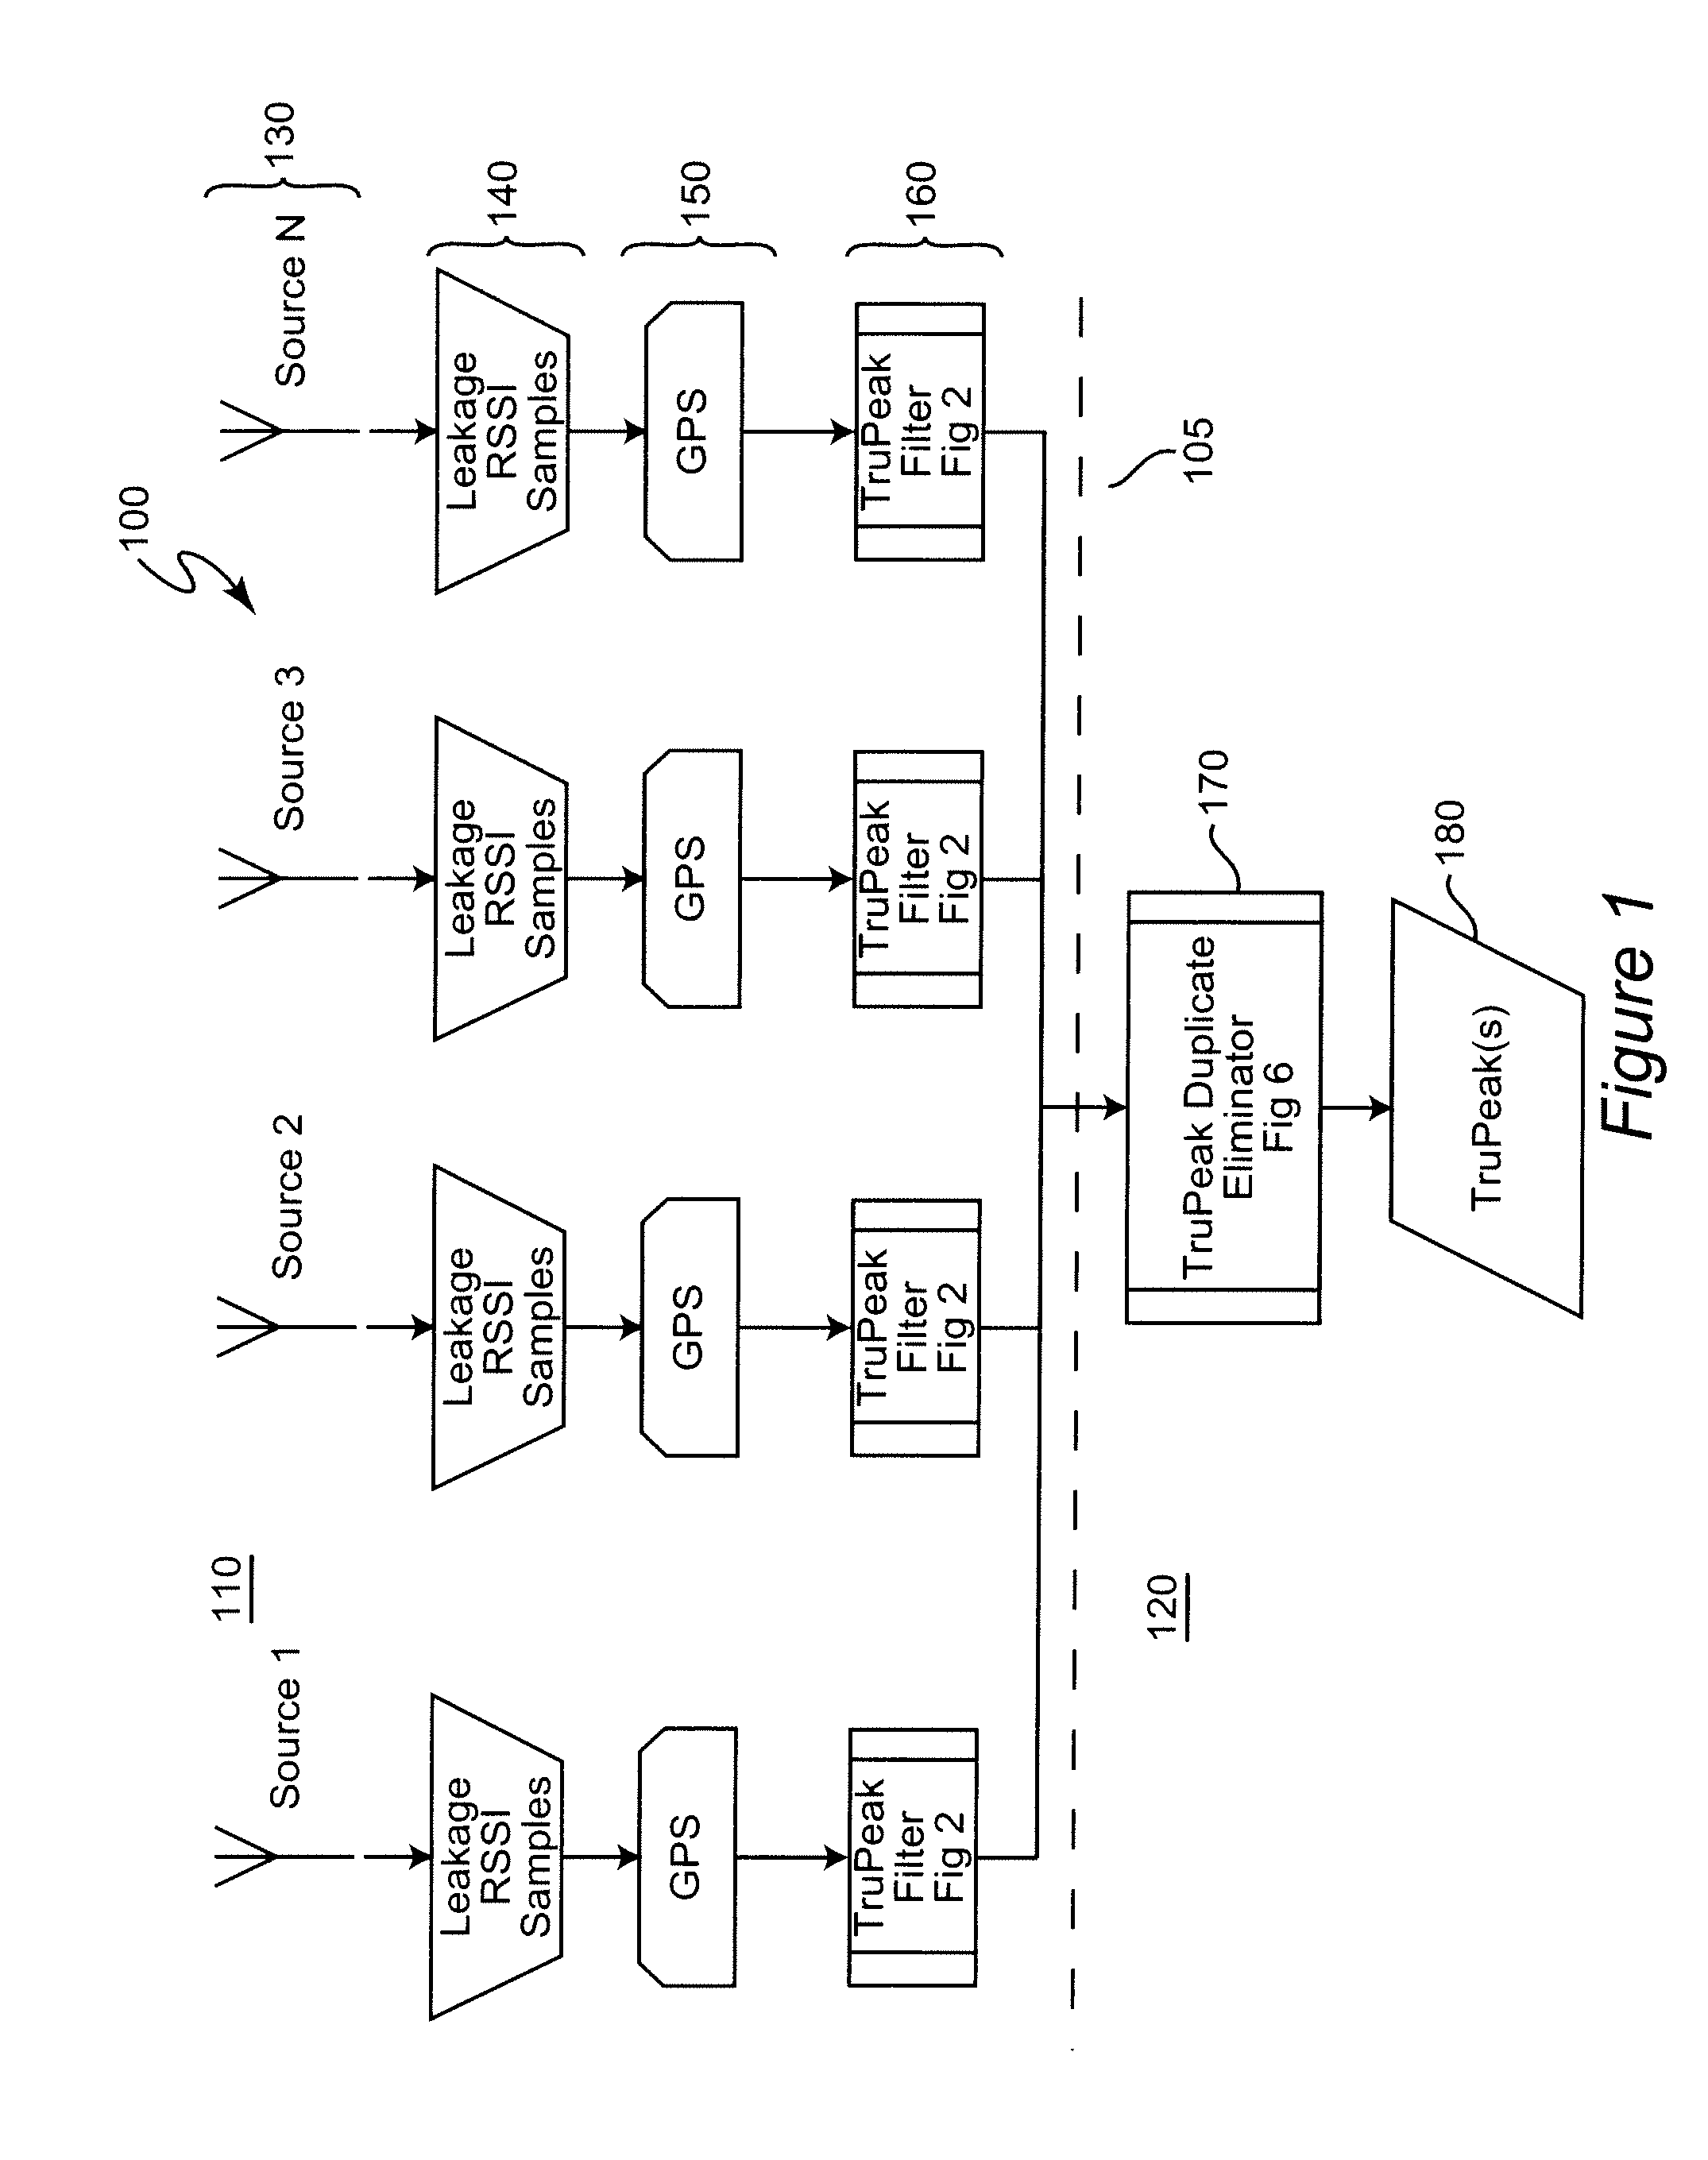 System and Method for Sorting Detection of Signal Egress from a Wired Communication System